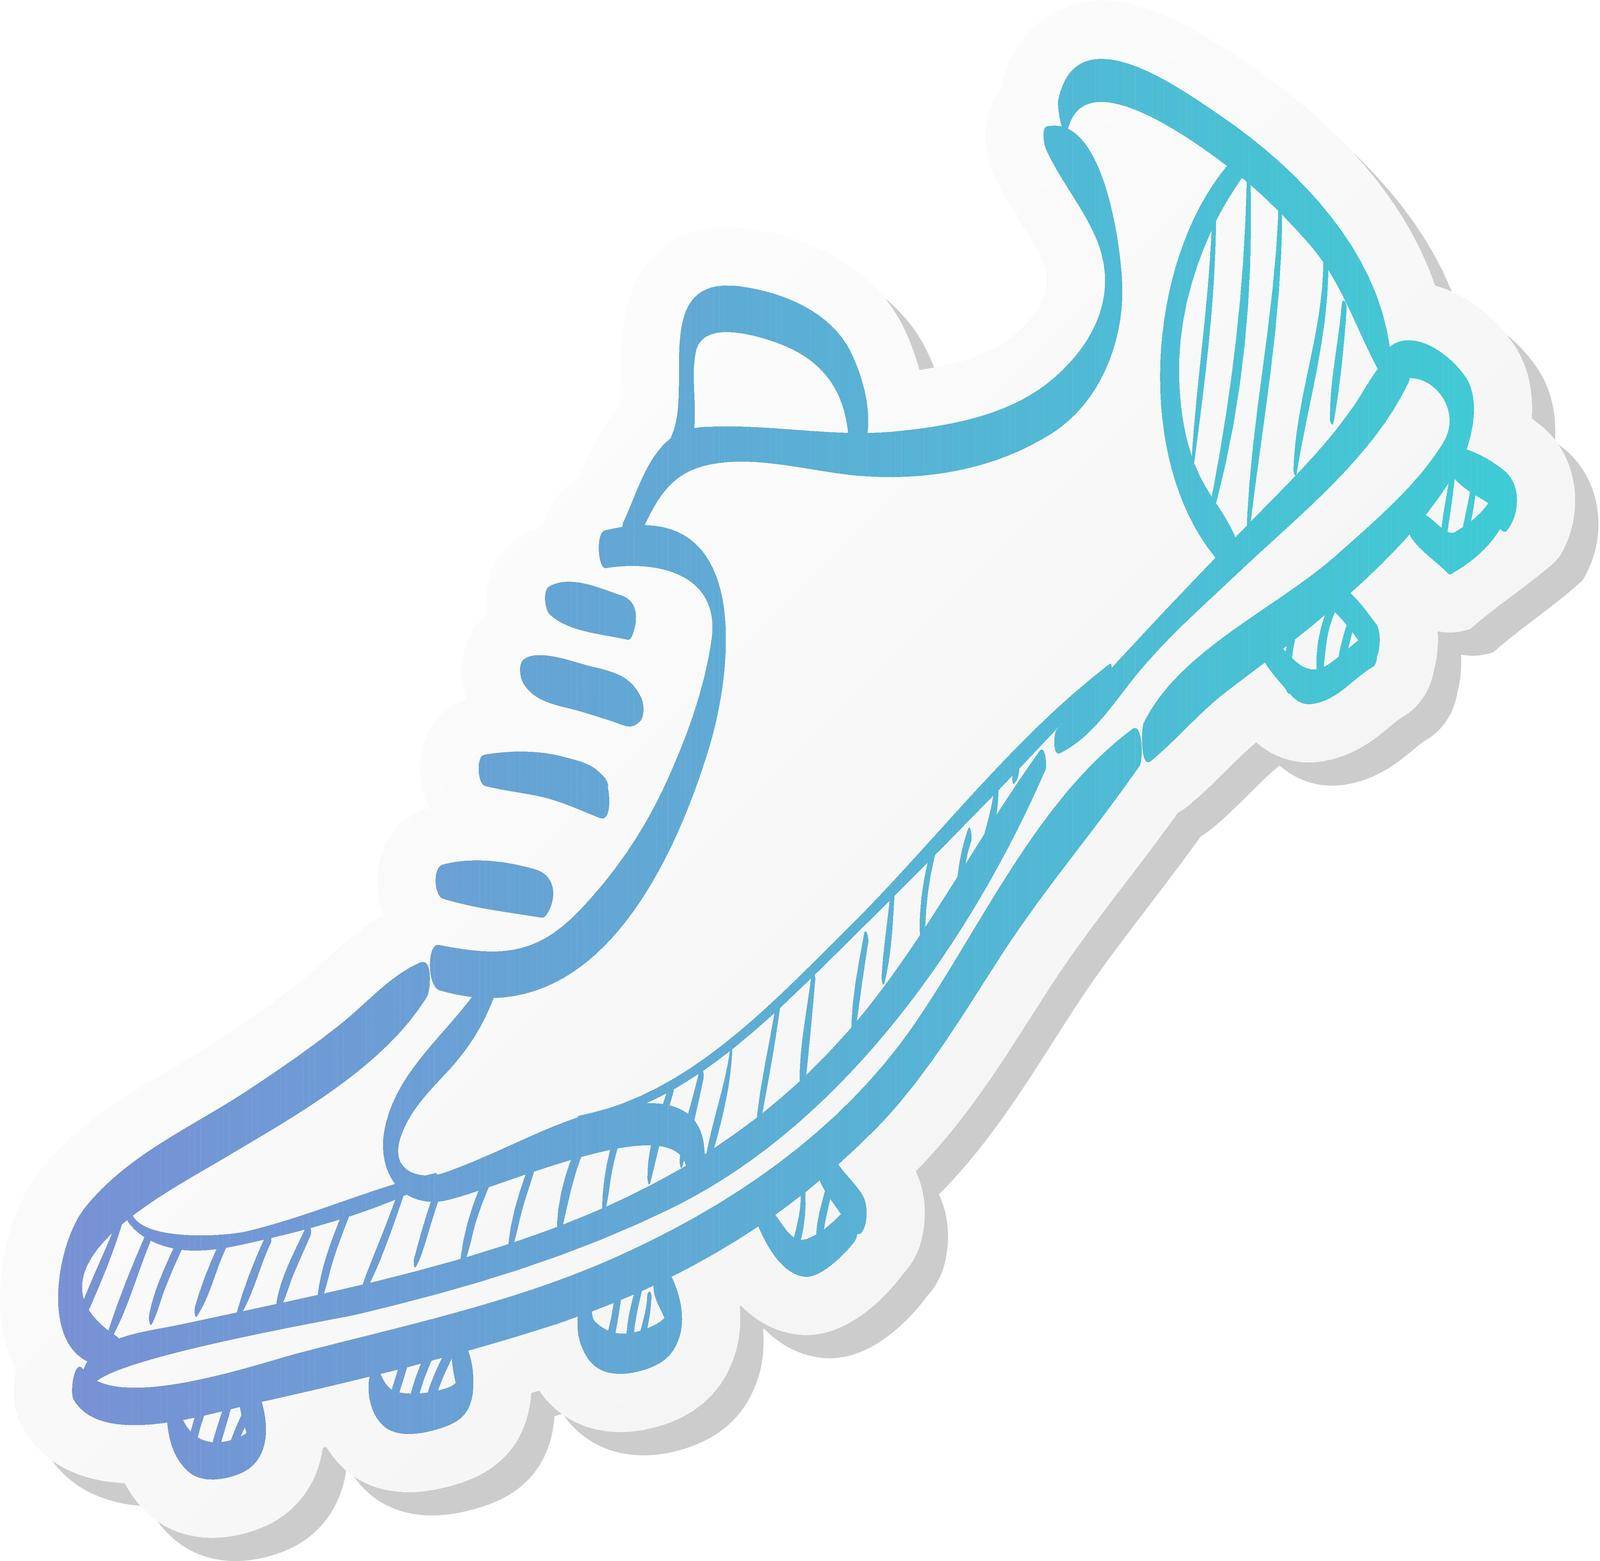 Soccer Shoe icon in sticker color style. Sport football foot protection